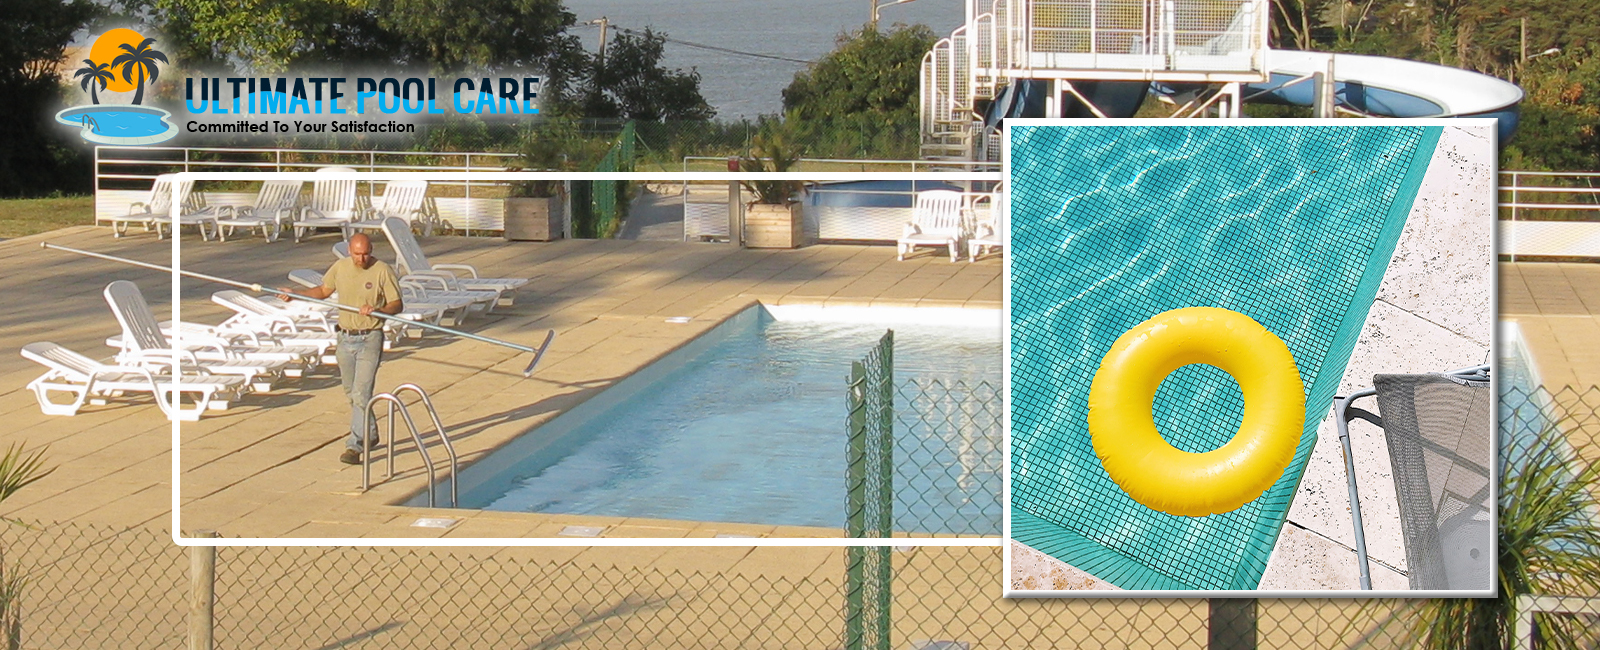 weekly-Pool-expert-cleaning-inground-pool-using-leaf-net-yellow-tube-on-top-of-pool-safety-net